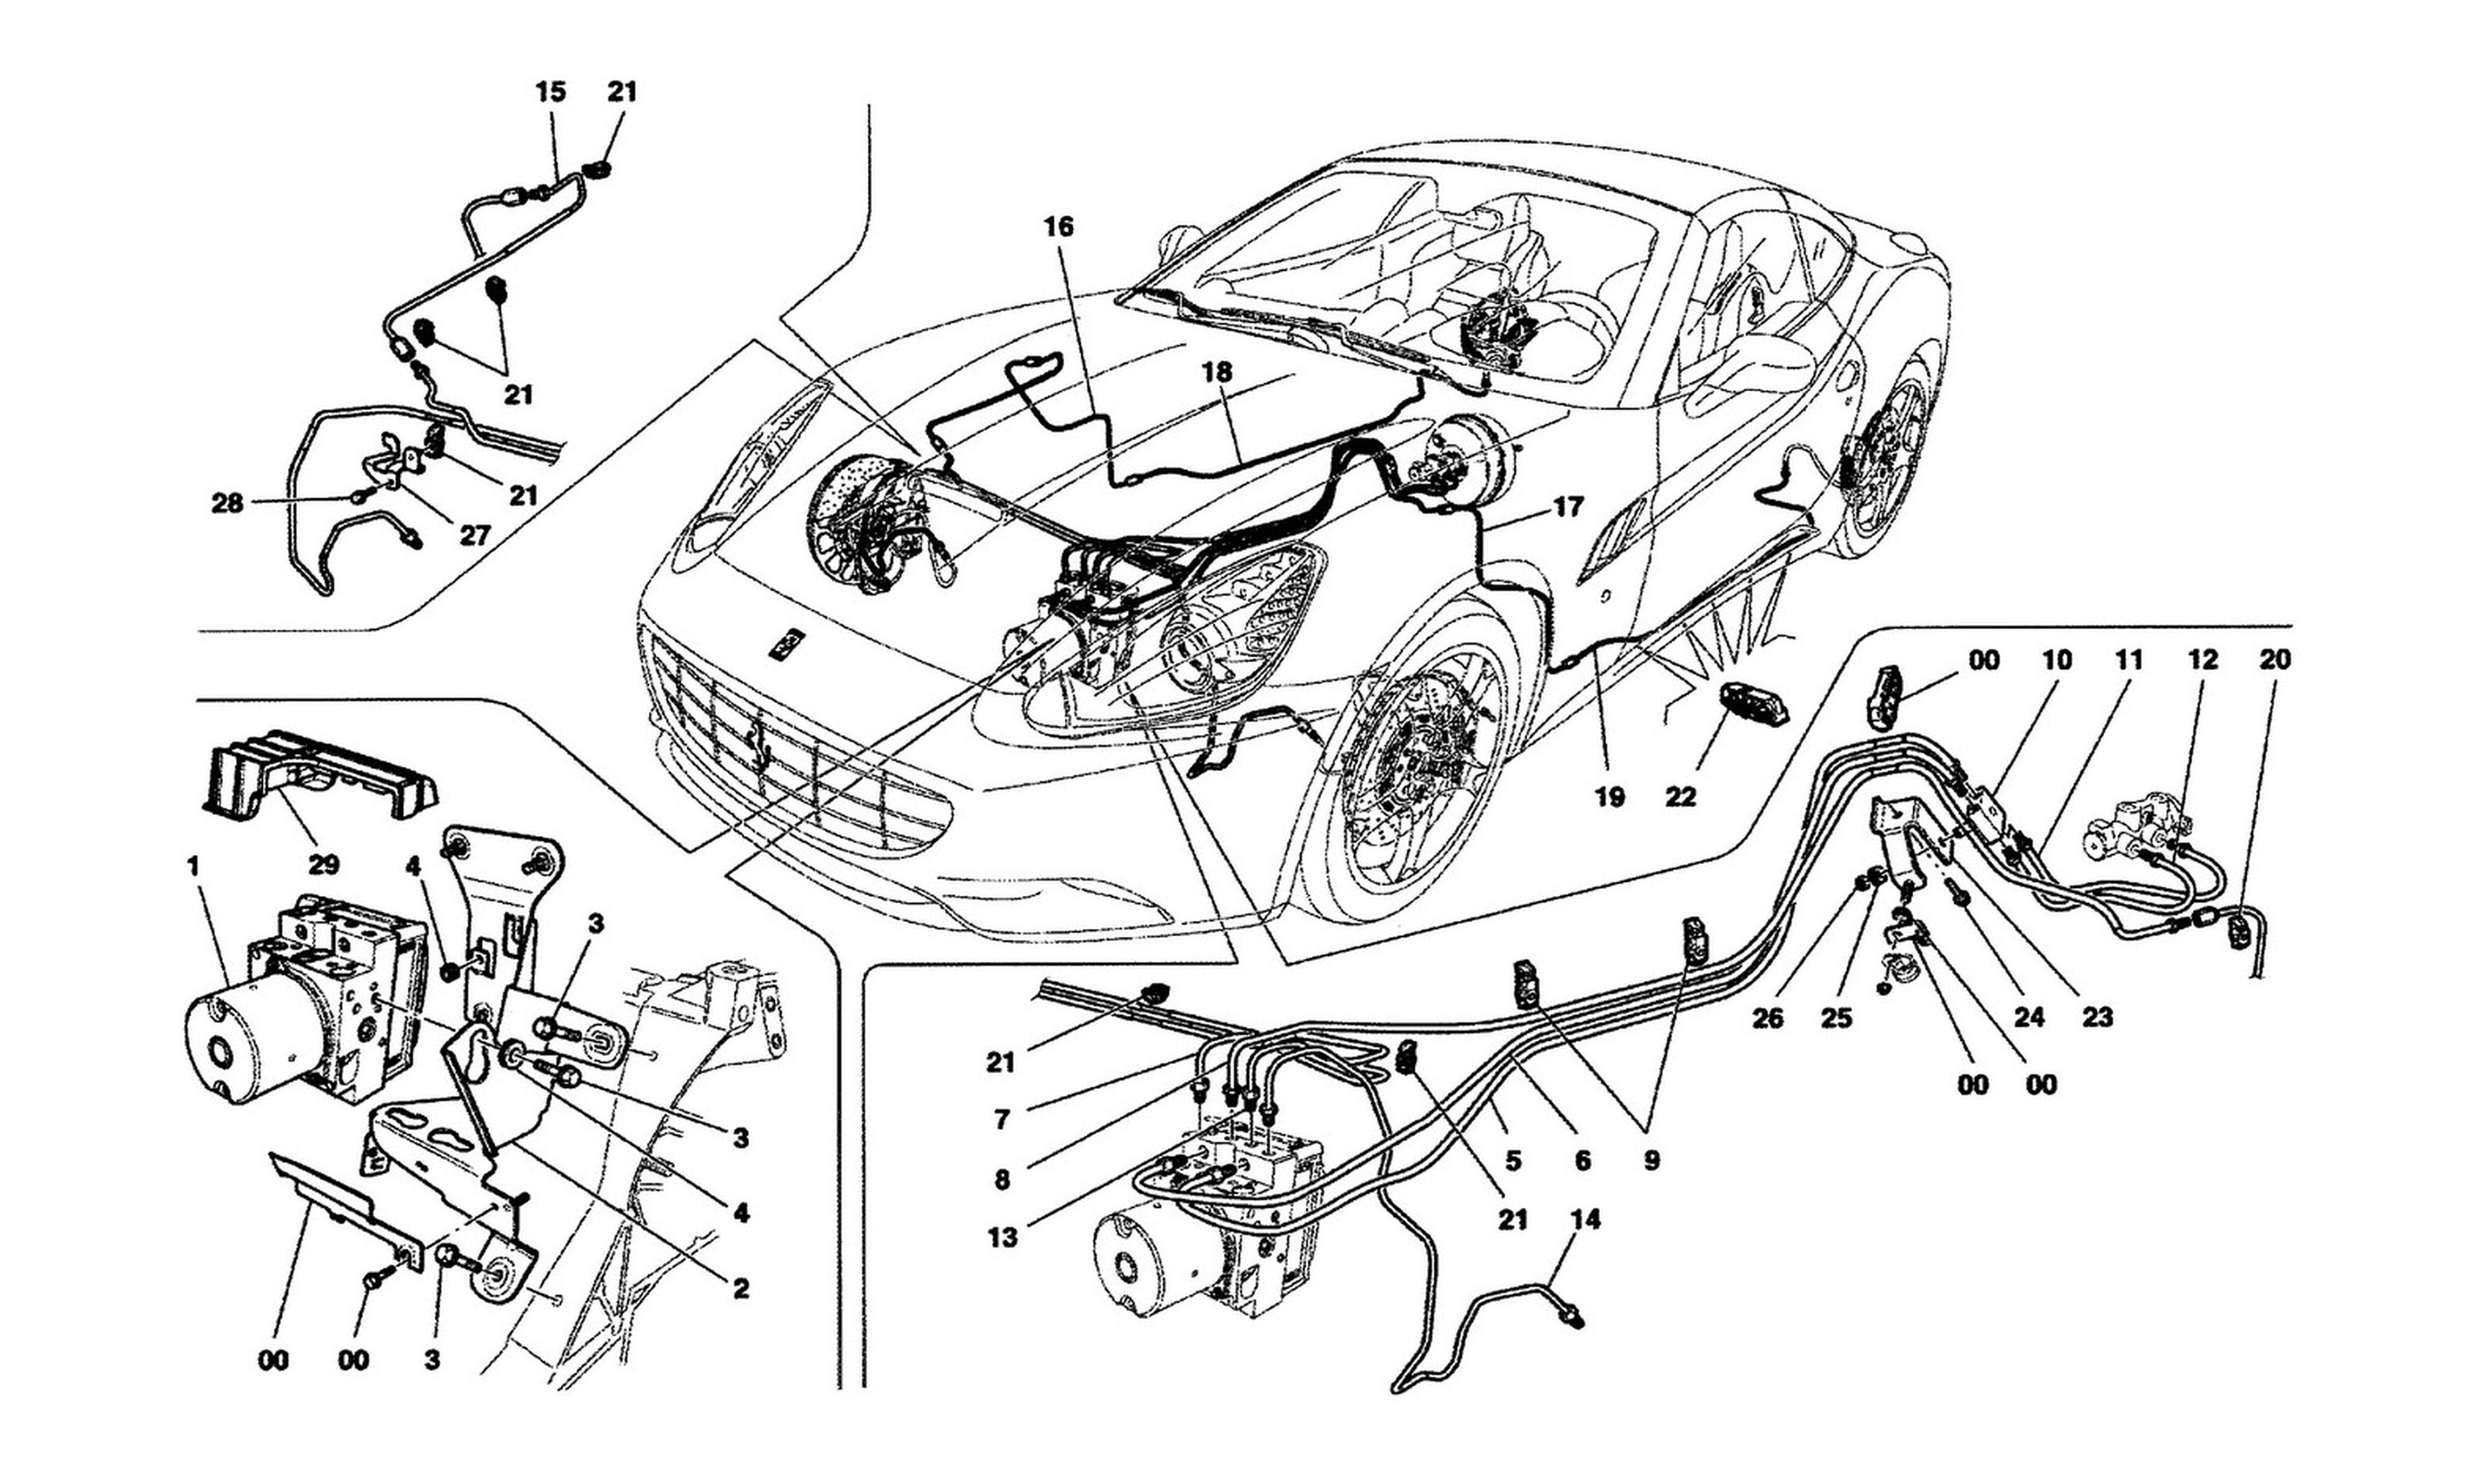 Schematic: Brake System -Not For Gd-